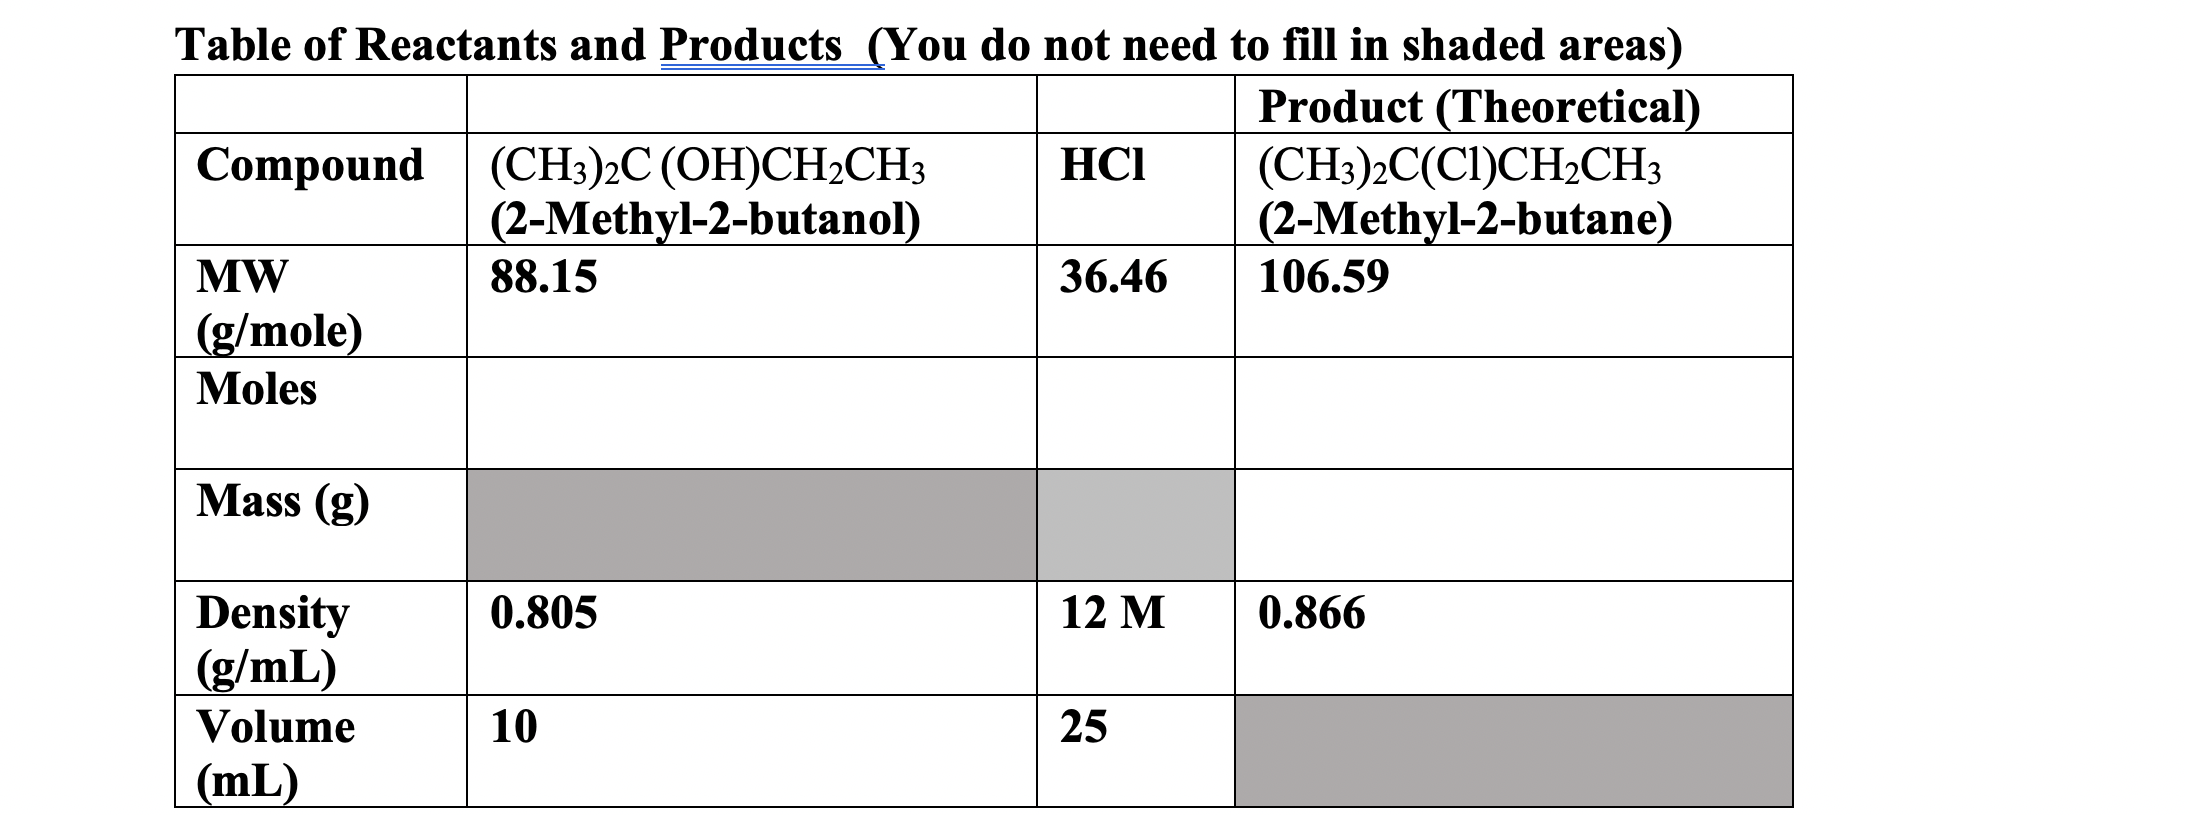 Table of Reactants and Products (You do not need to fill in shaded areas)
Product (Theoretical)
(CH3)2C(CI)CH2CH3
(2-Methyl-2-butane)
106.59
Compound (CH3)2C (OH)CH2CH;
(2-Methyl-2-butanol)
HCI
MW
88.15
36.46
(g/mole)
Moles
Mass (g)
0.866
Density
(g/mL)
0.805
12 M
Volume
10
25
(mL)
